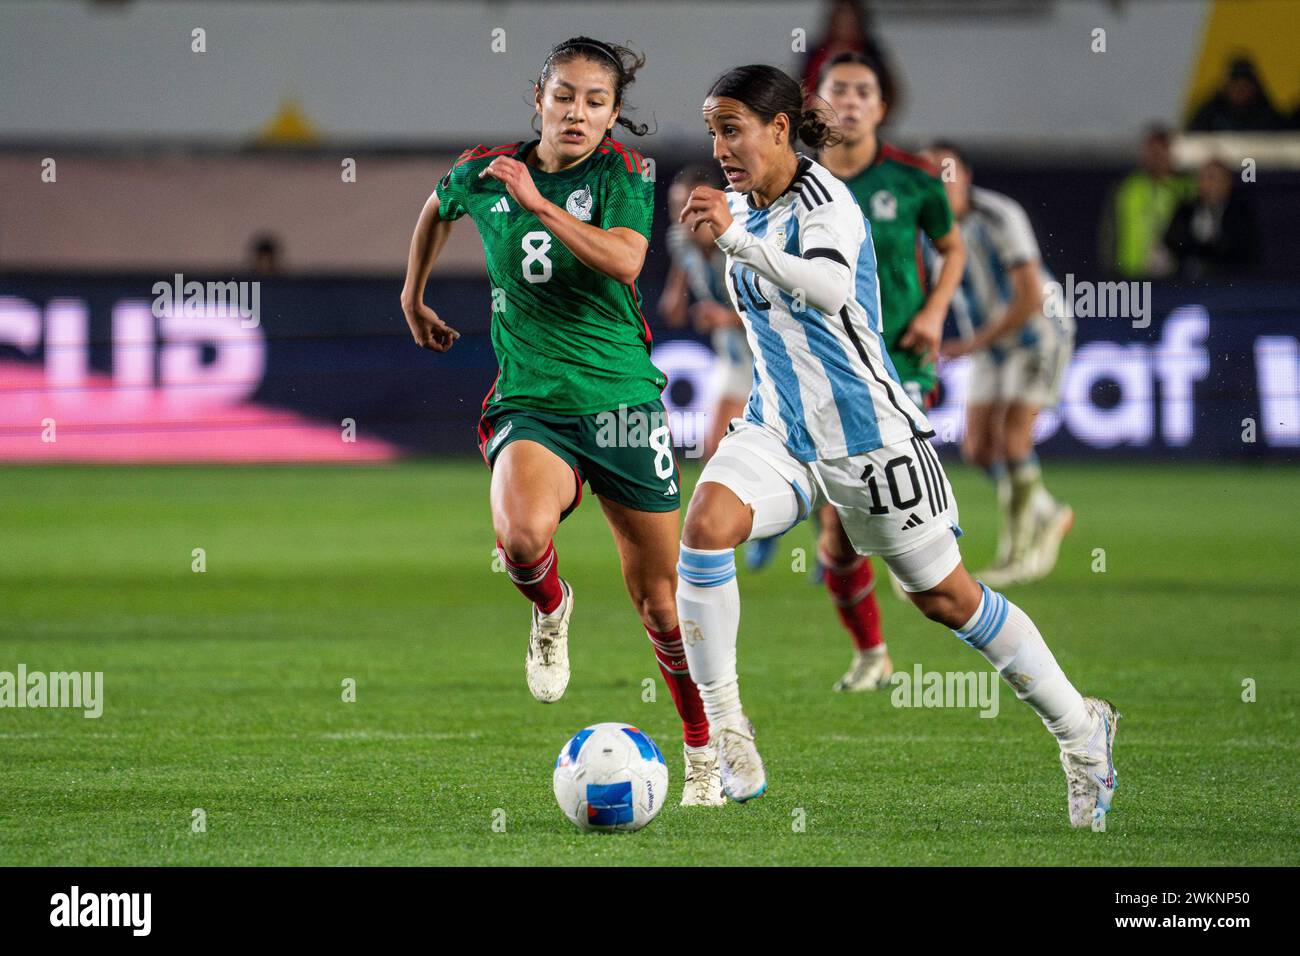 Argentina midfielder Dalila Ippólito (10) is defended by Mexico midfielder Alexia Delgado (8) during the Concacaf W Gold Cup Group A match, Tuesday, F Stock Photo